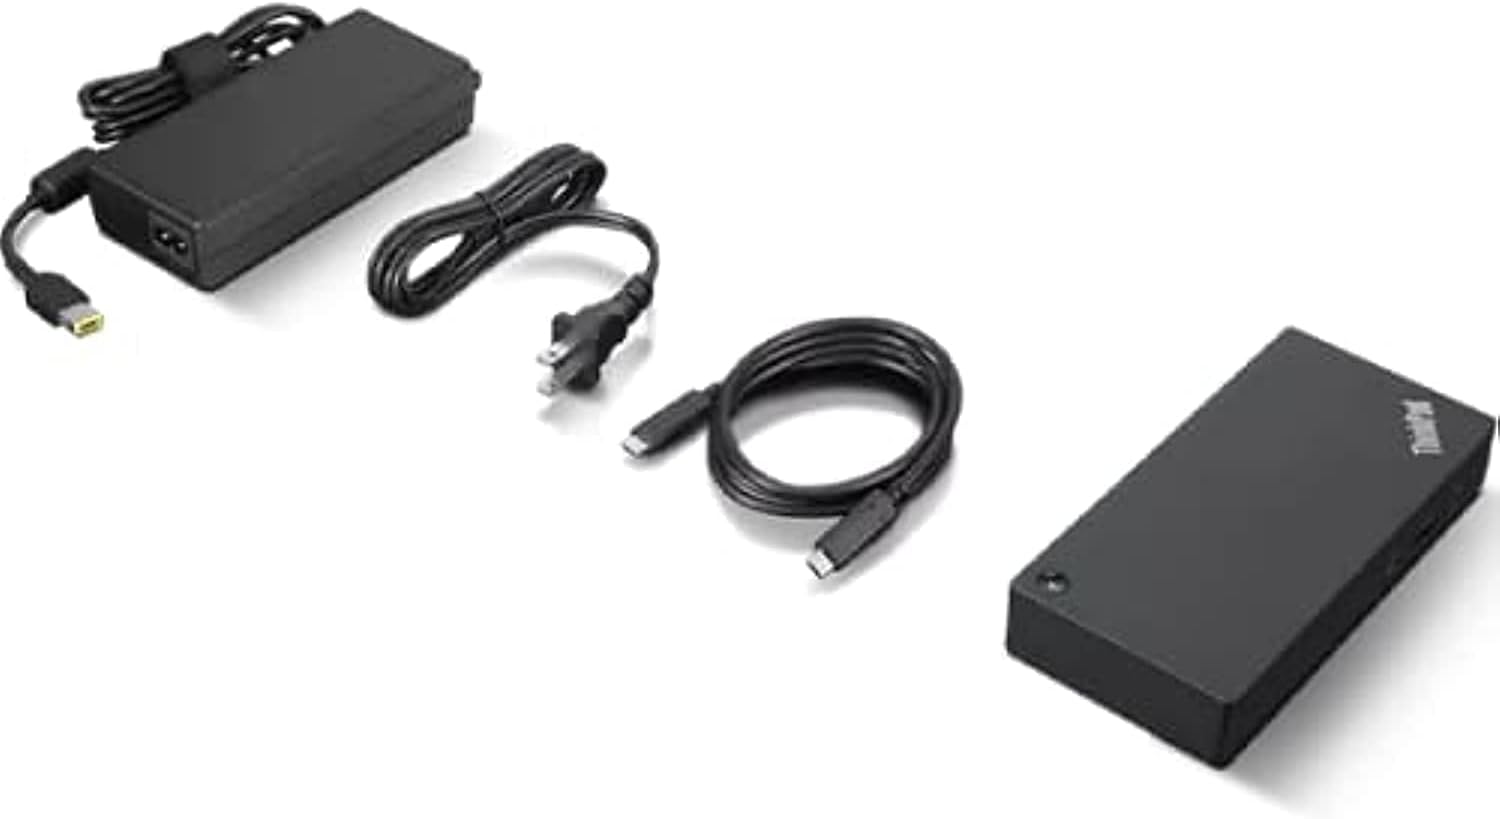 Universal USB-C Dock for Lenovo ThinkPad - Ideal for office and remote work, supports automatic firmware updates and traditional IT tools. 0195348192026